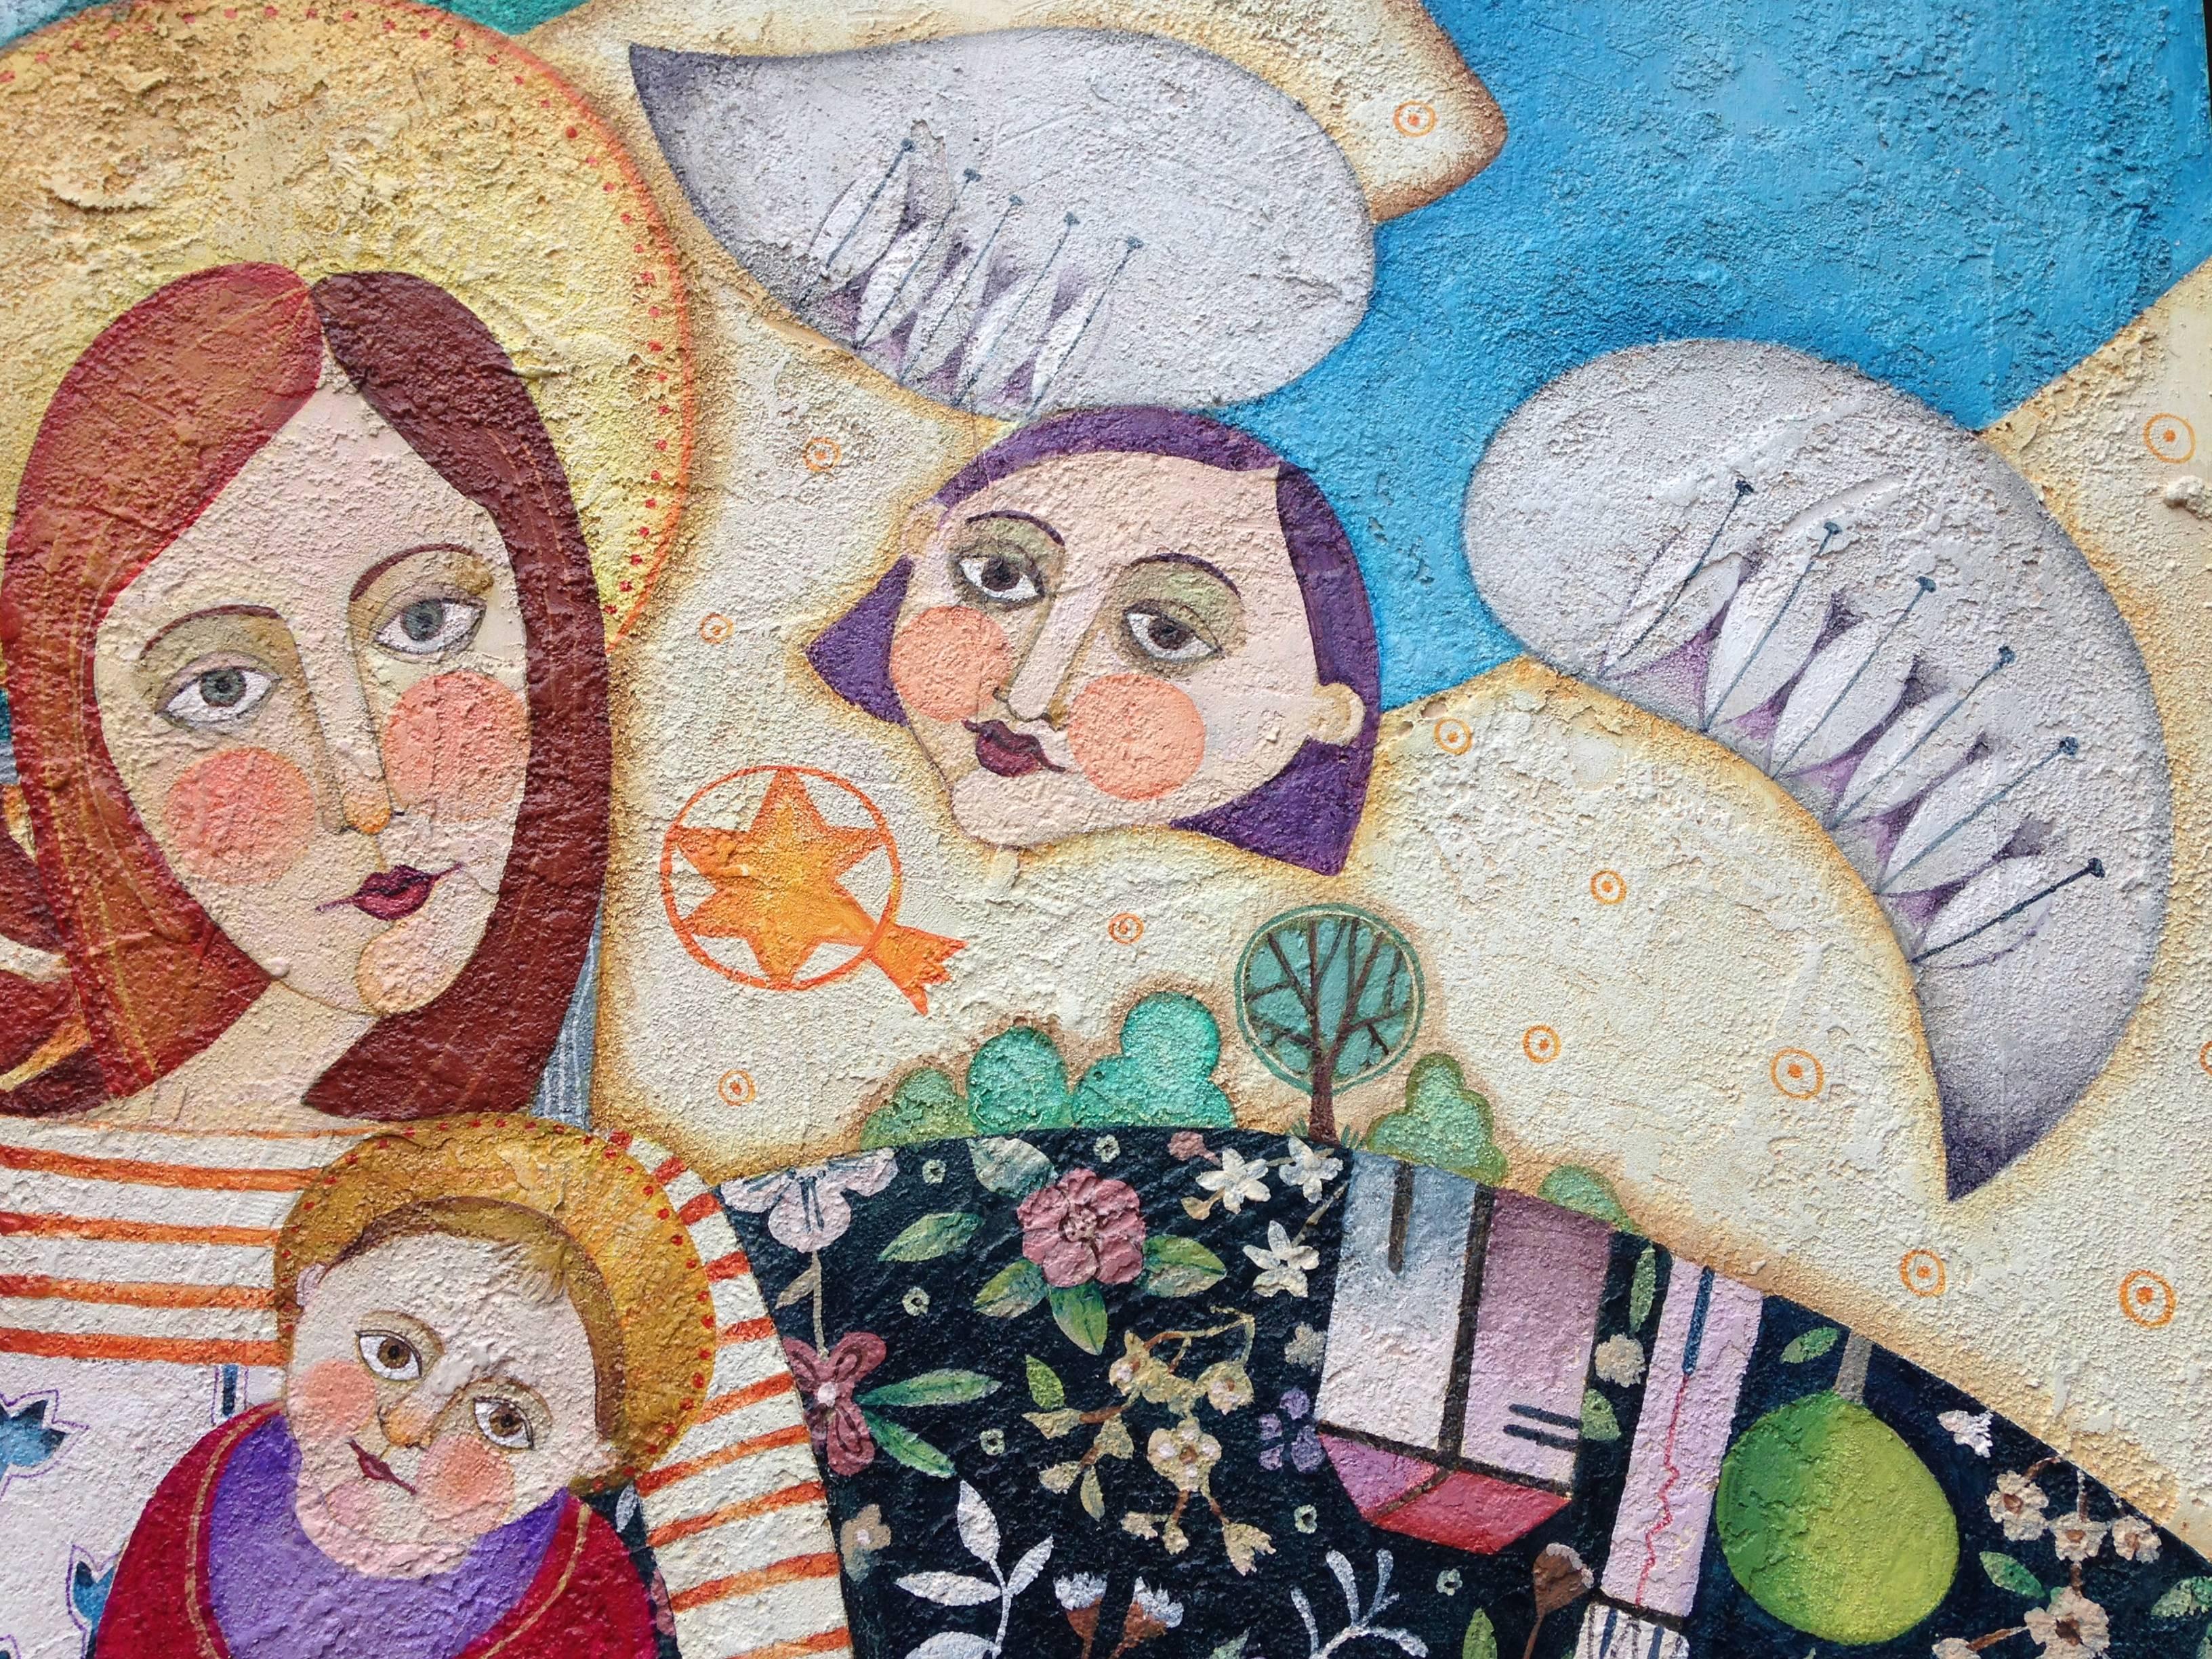 Christmas (Navidad). Colorful image of the Madonna and child in folk style - Painting by Raquel Fariñas